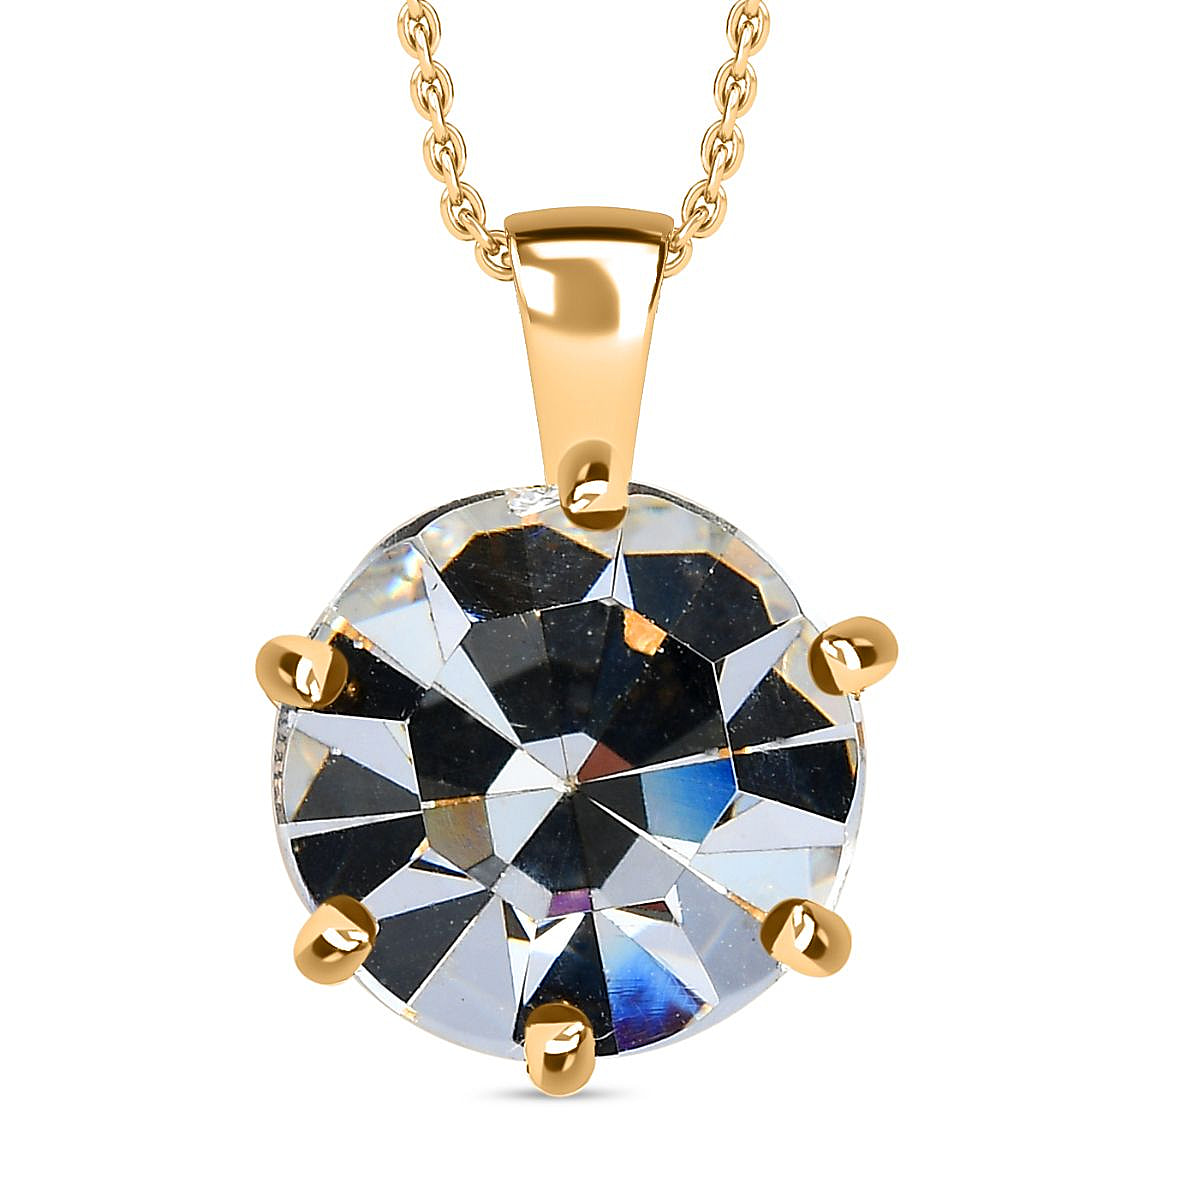 Finest Austrian Crystal Pendant with Stainless Steel Chain (Size 20) in Platinum Overlay and 18K Vermeil Yellow Gold Plated Sterling Silver